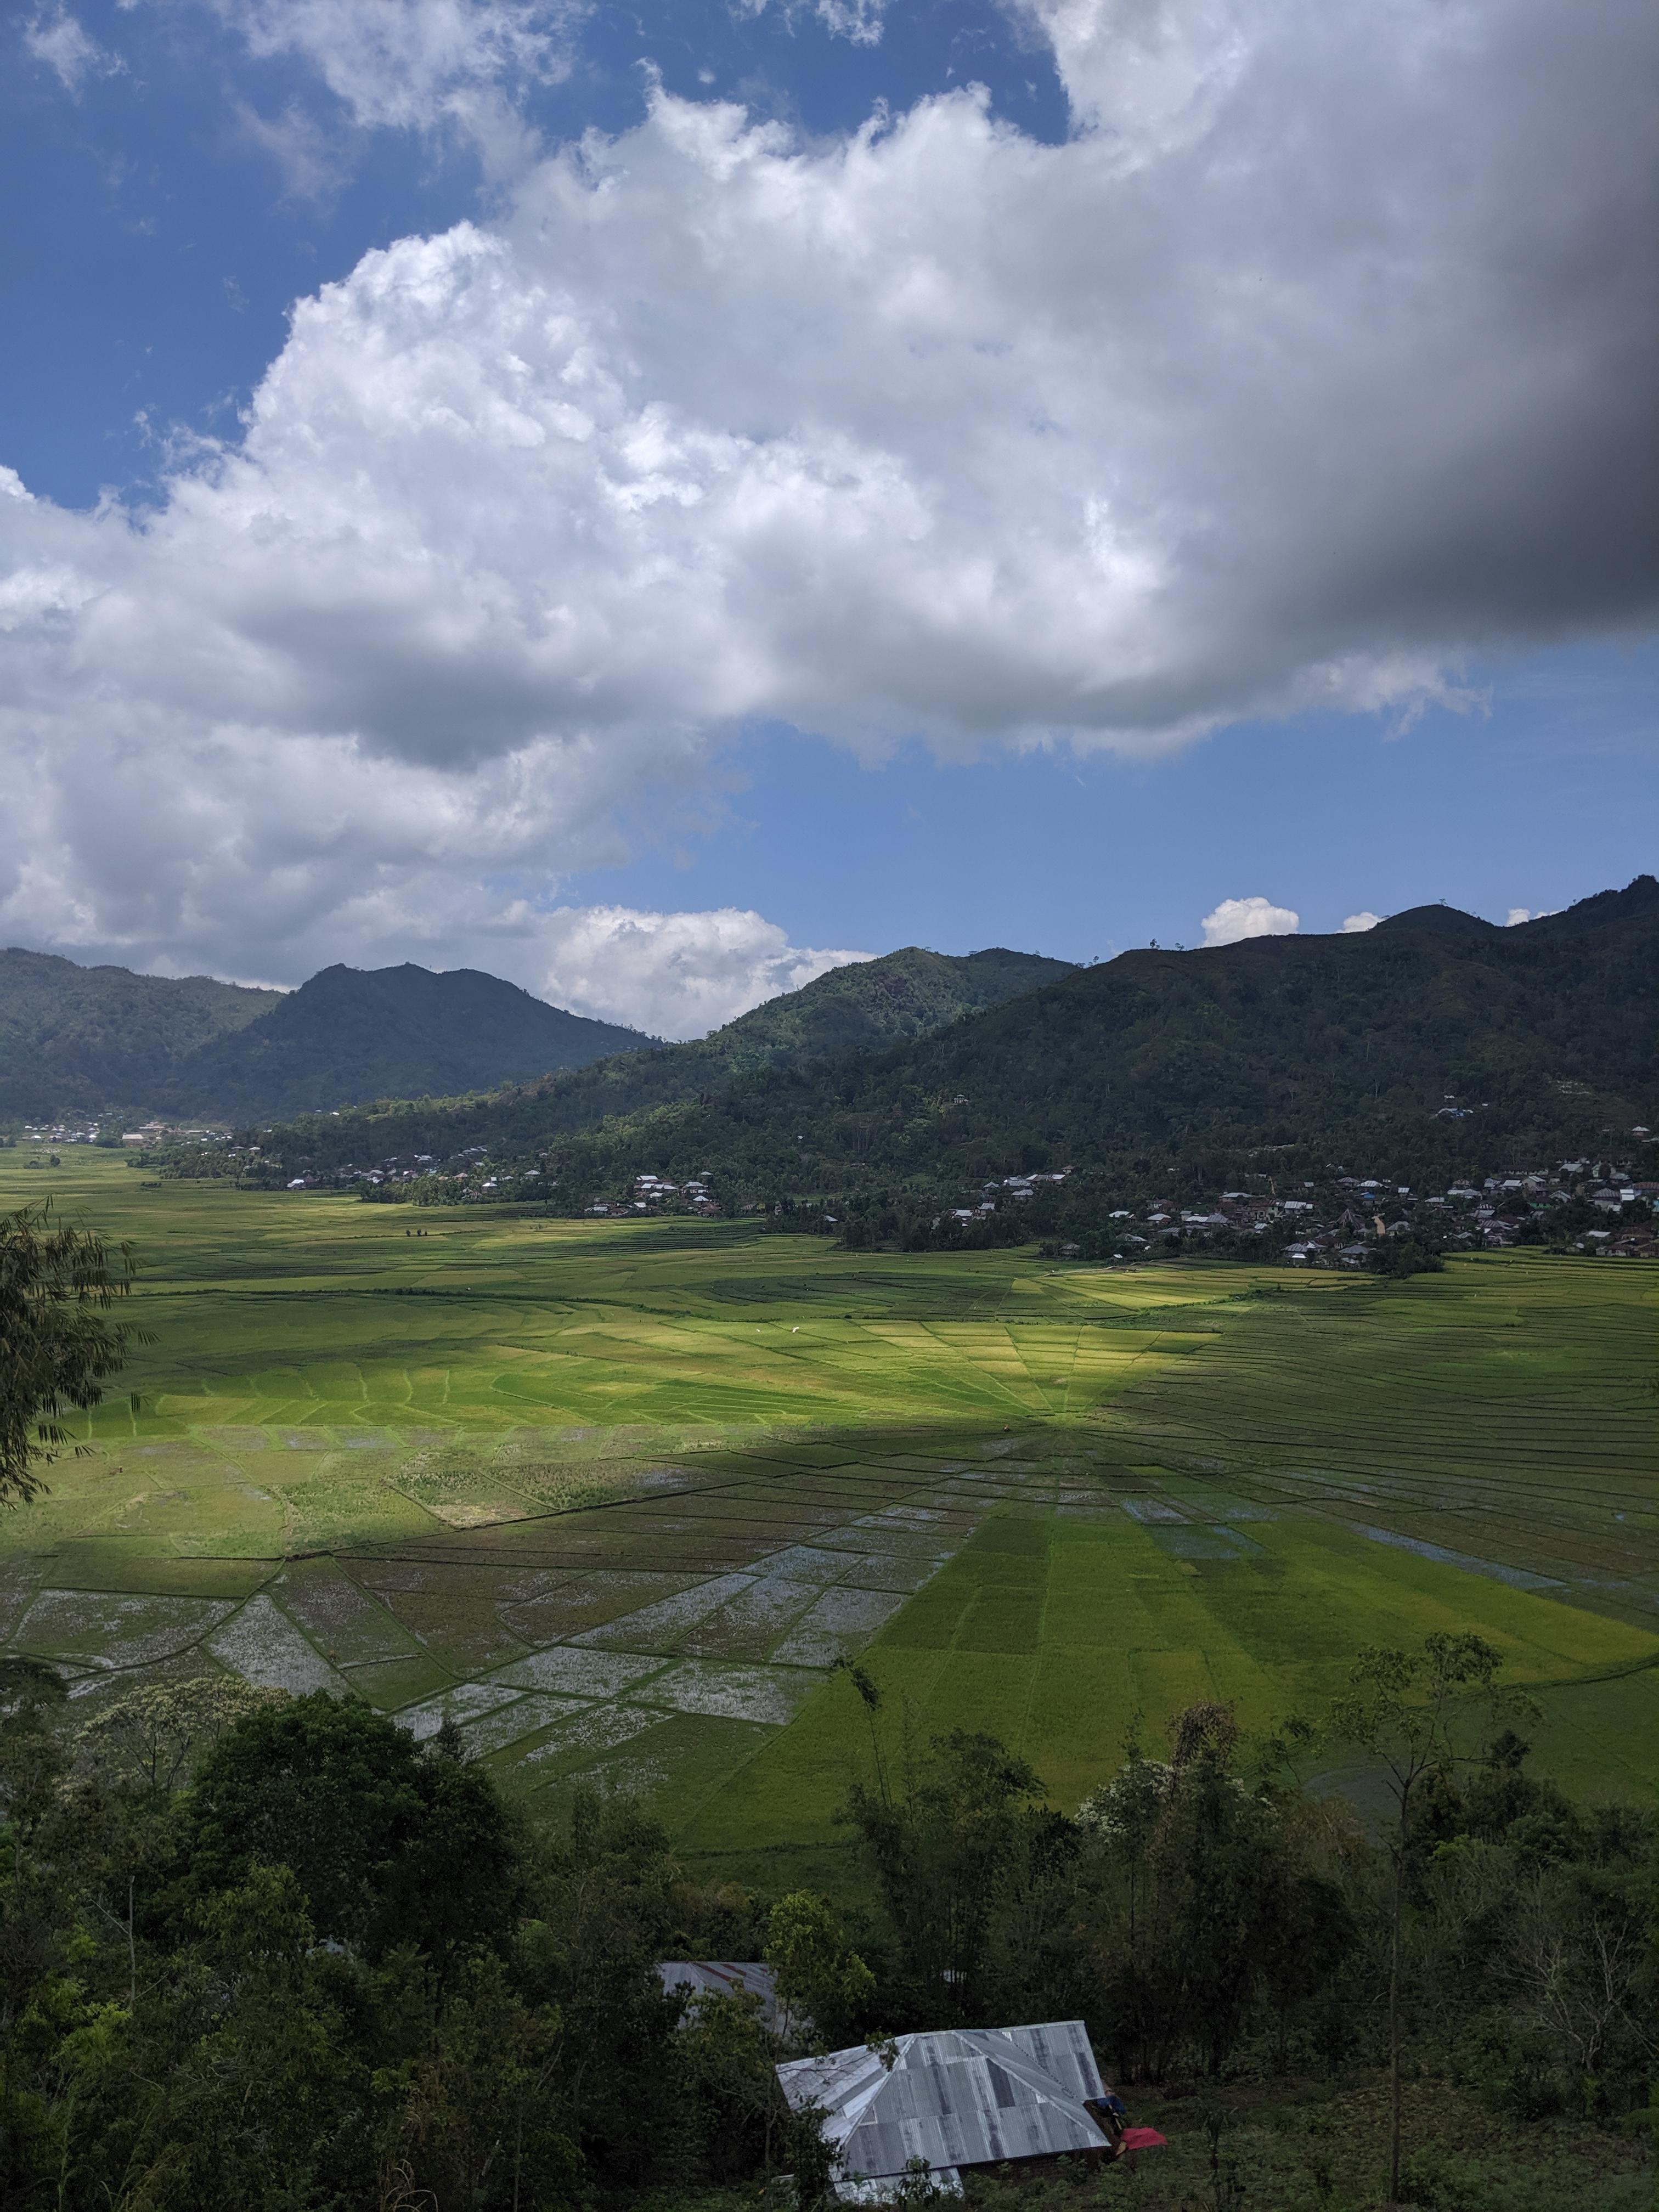 A photo looking down on to Lingko Paddy fields near Cancar in Flores. The shape of the fields is like a pie chart, with mountains and villages in the distance.